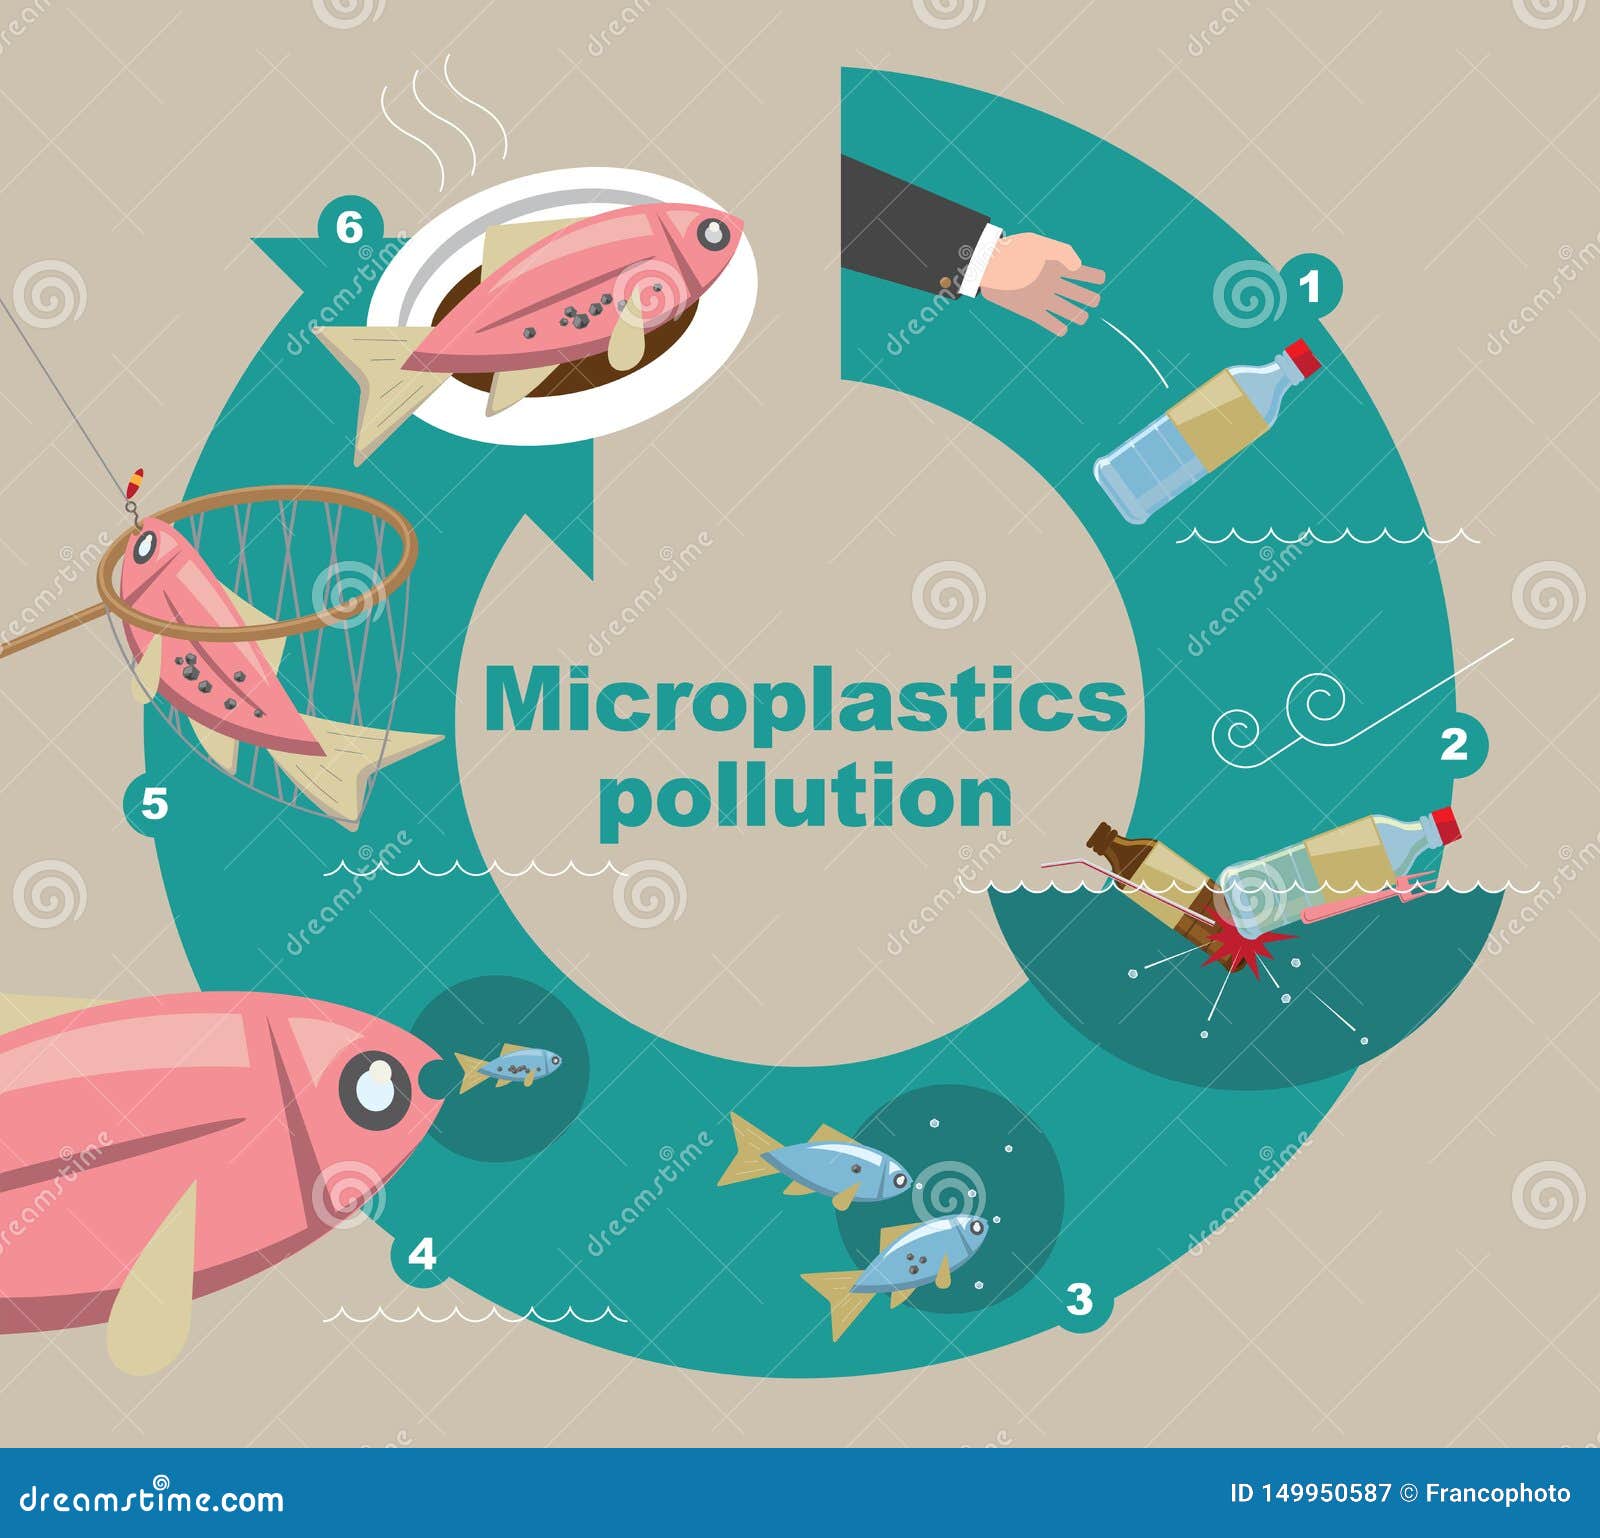 illustrative diagram of how microplastics pollute the environment